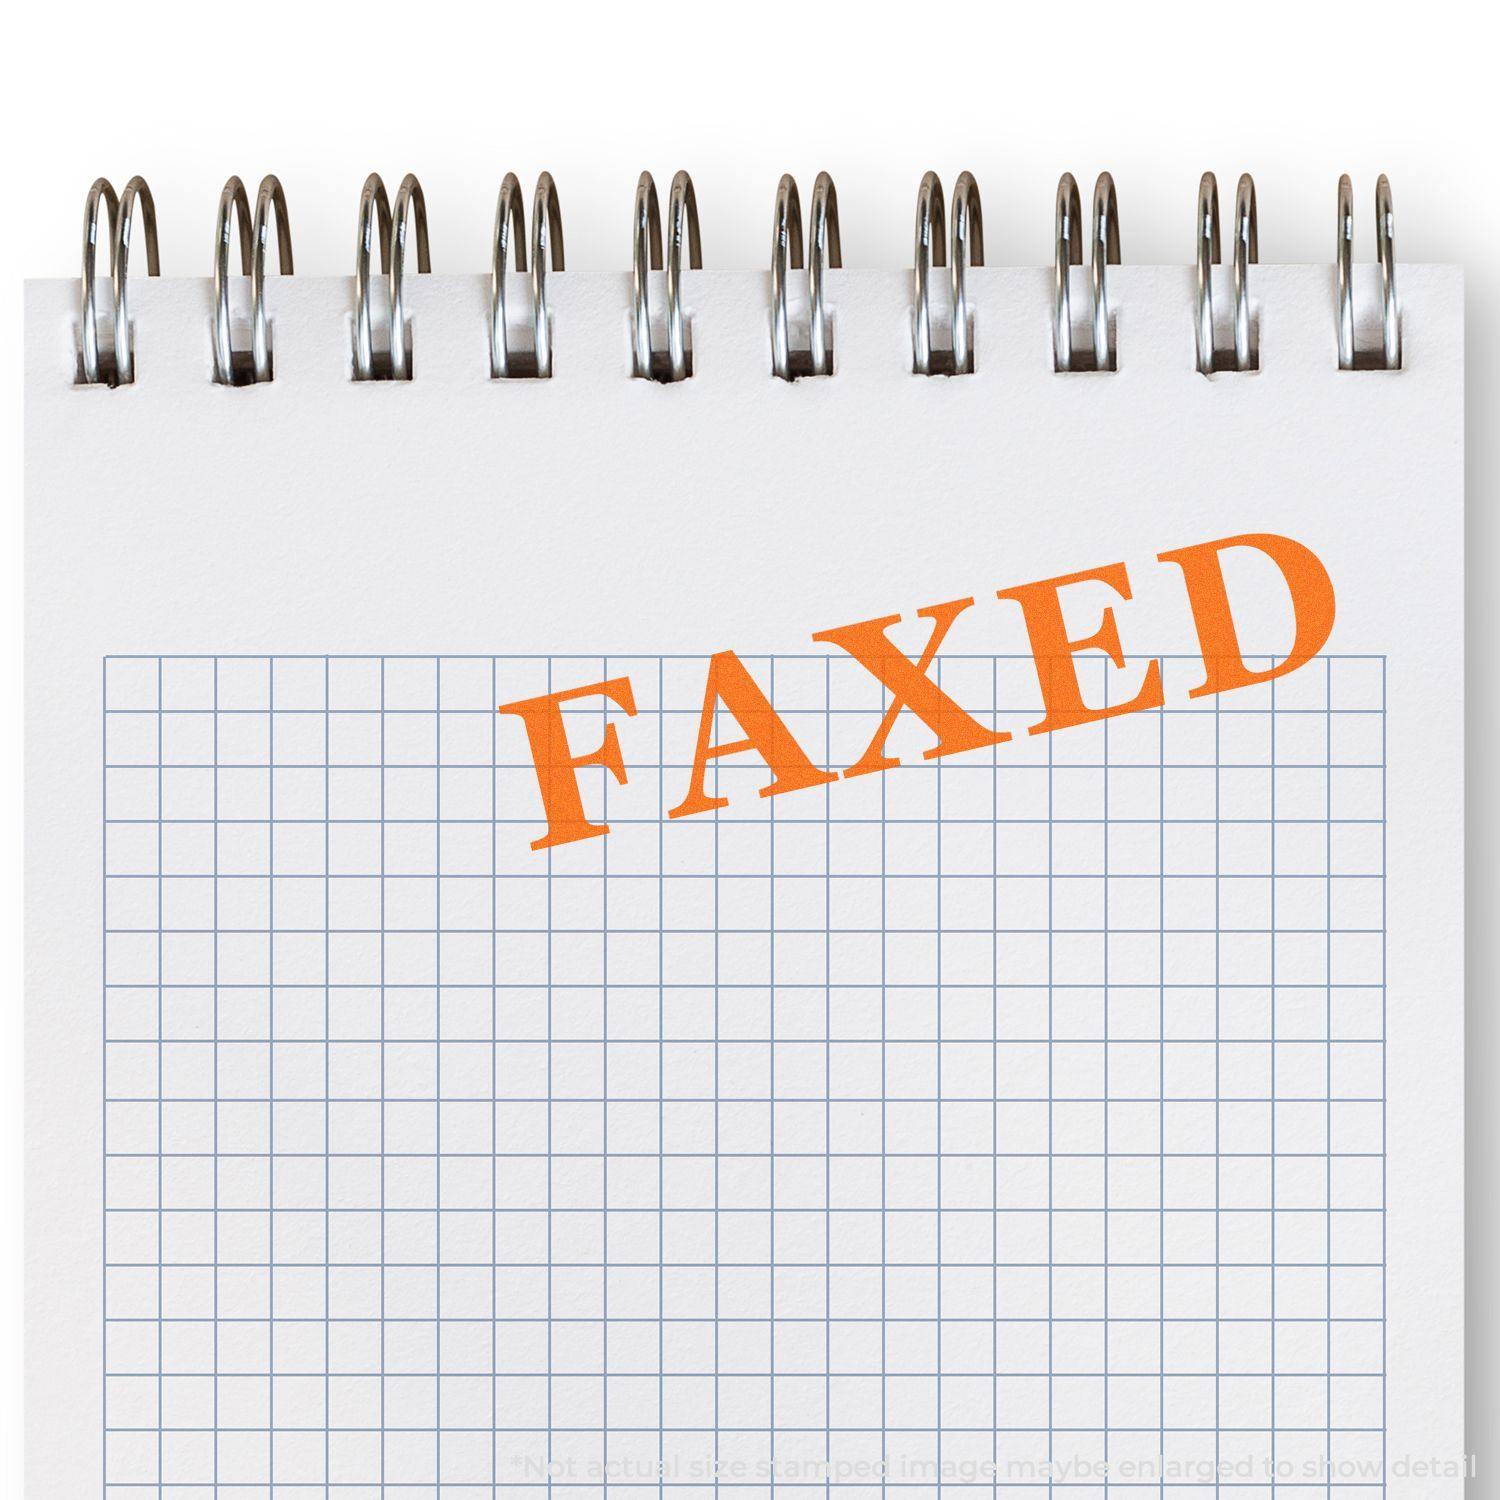 A self-inking stamp with a stamped image showing how the text "FAXED" in a times font is displayed after stamping.